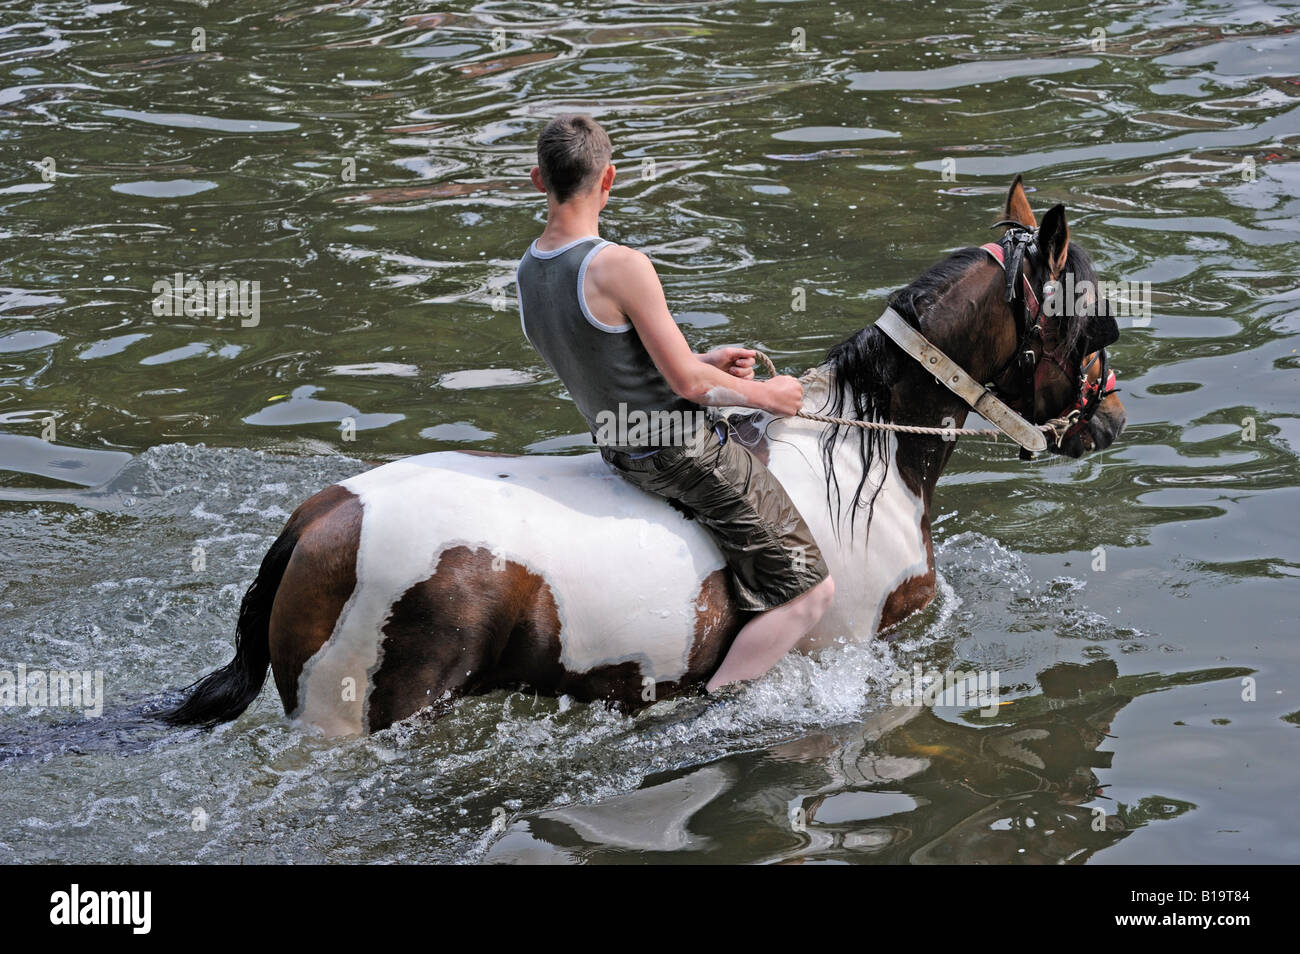 Gypsy traveller riding horse in River Eden. Appleby Horse Fair. Appleby-in-Westmorland, Cumbria, England, United Kingdom, Europe Stock Photo